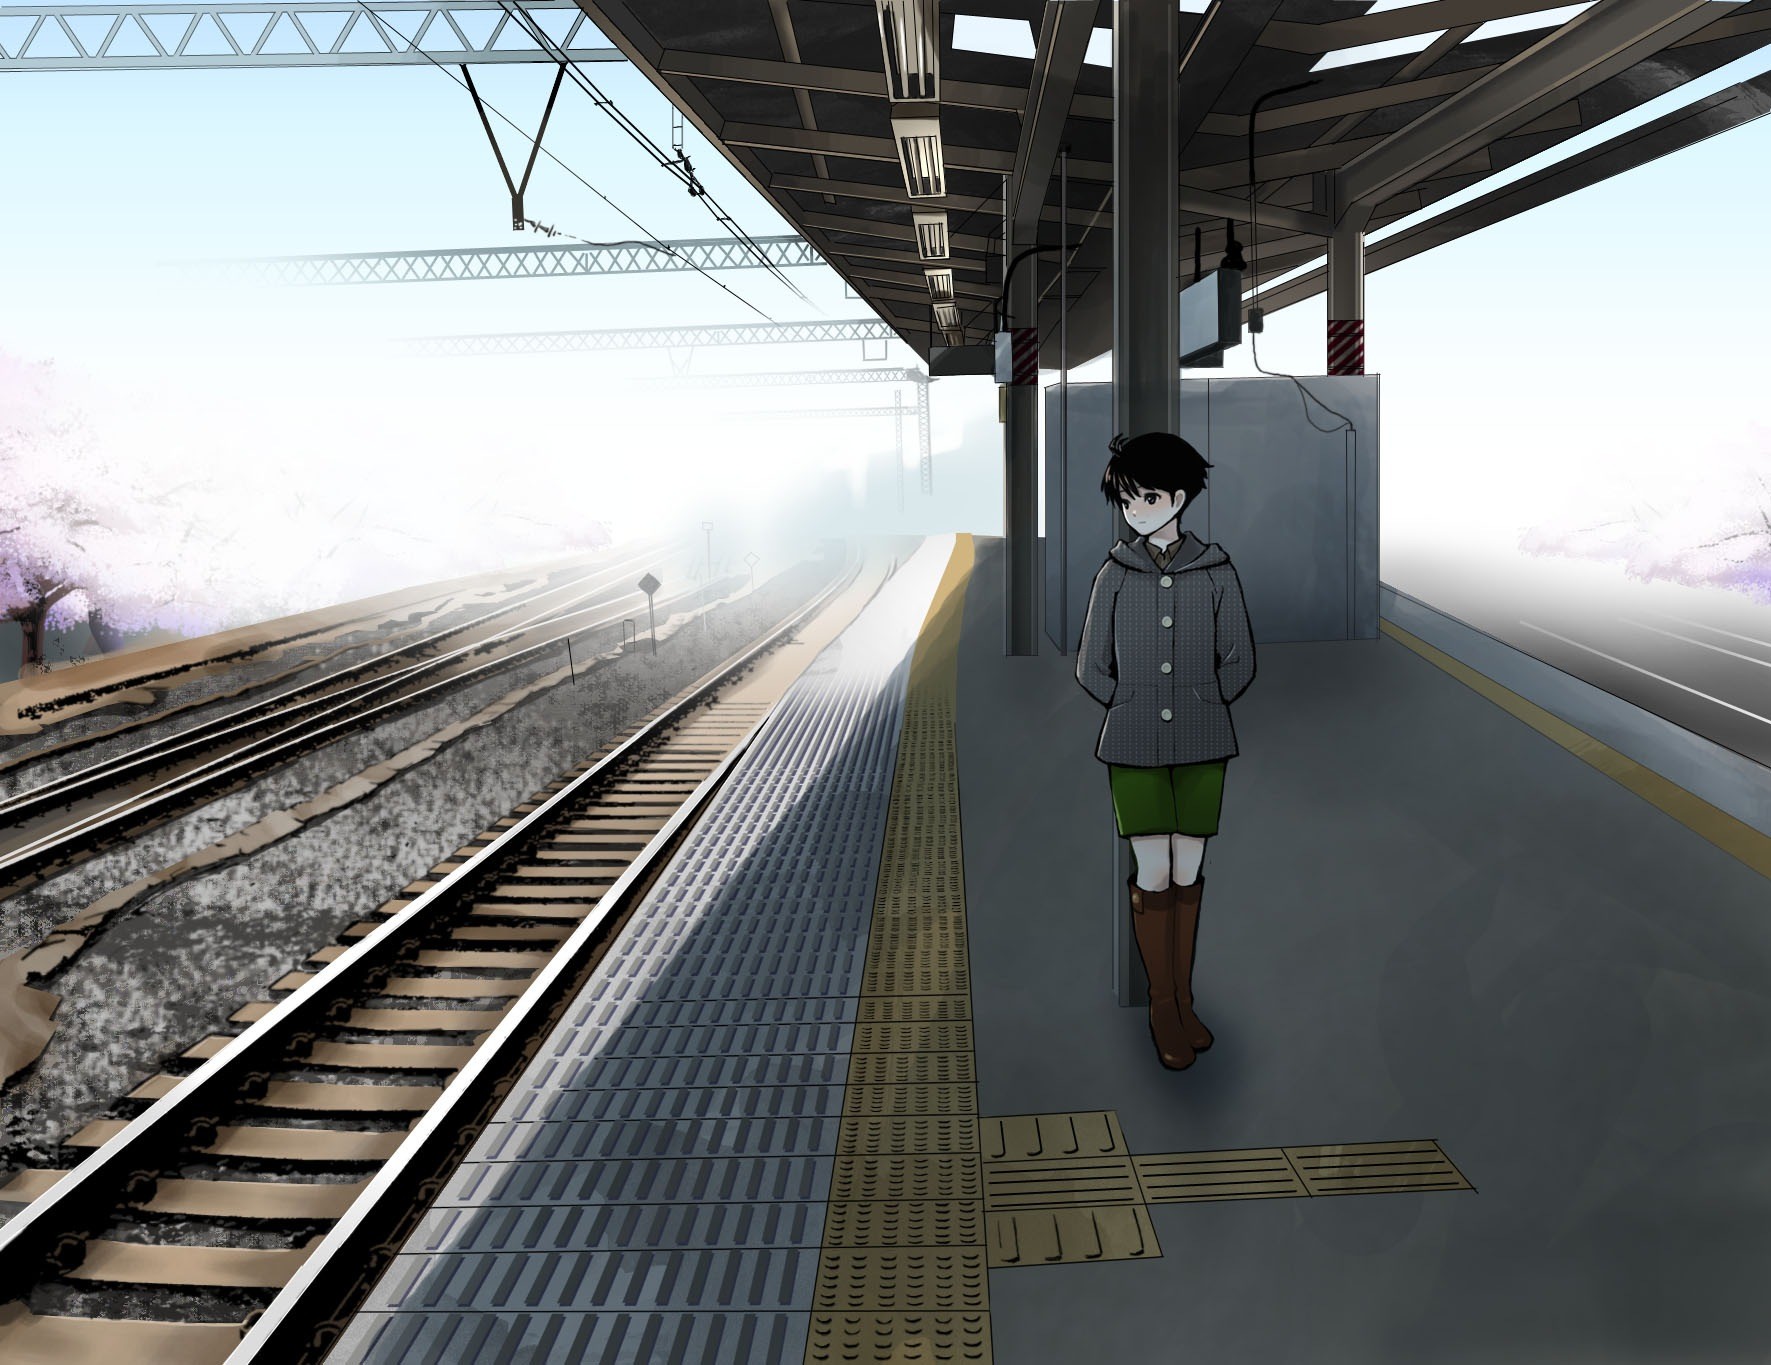 Mobile wallpaper Anime Train Station Original 822527 download the  picture for free